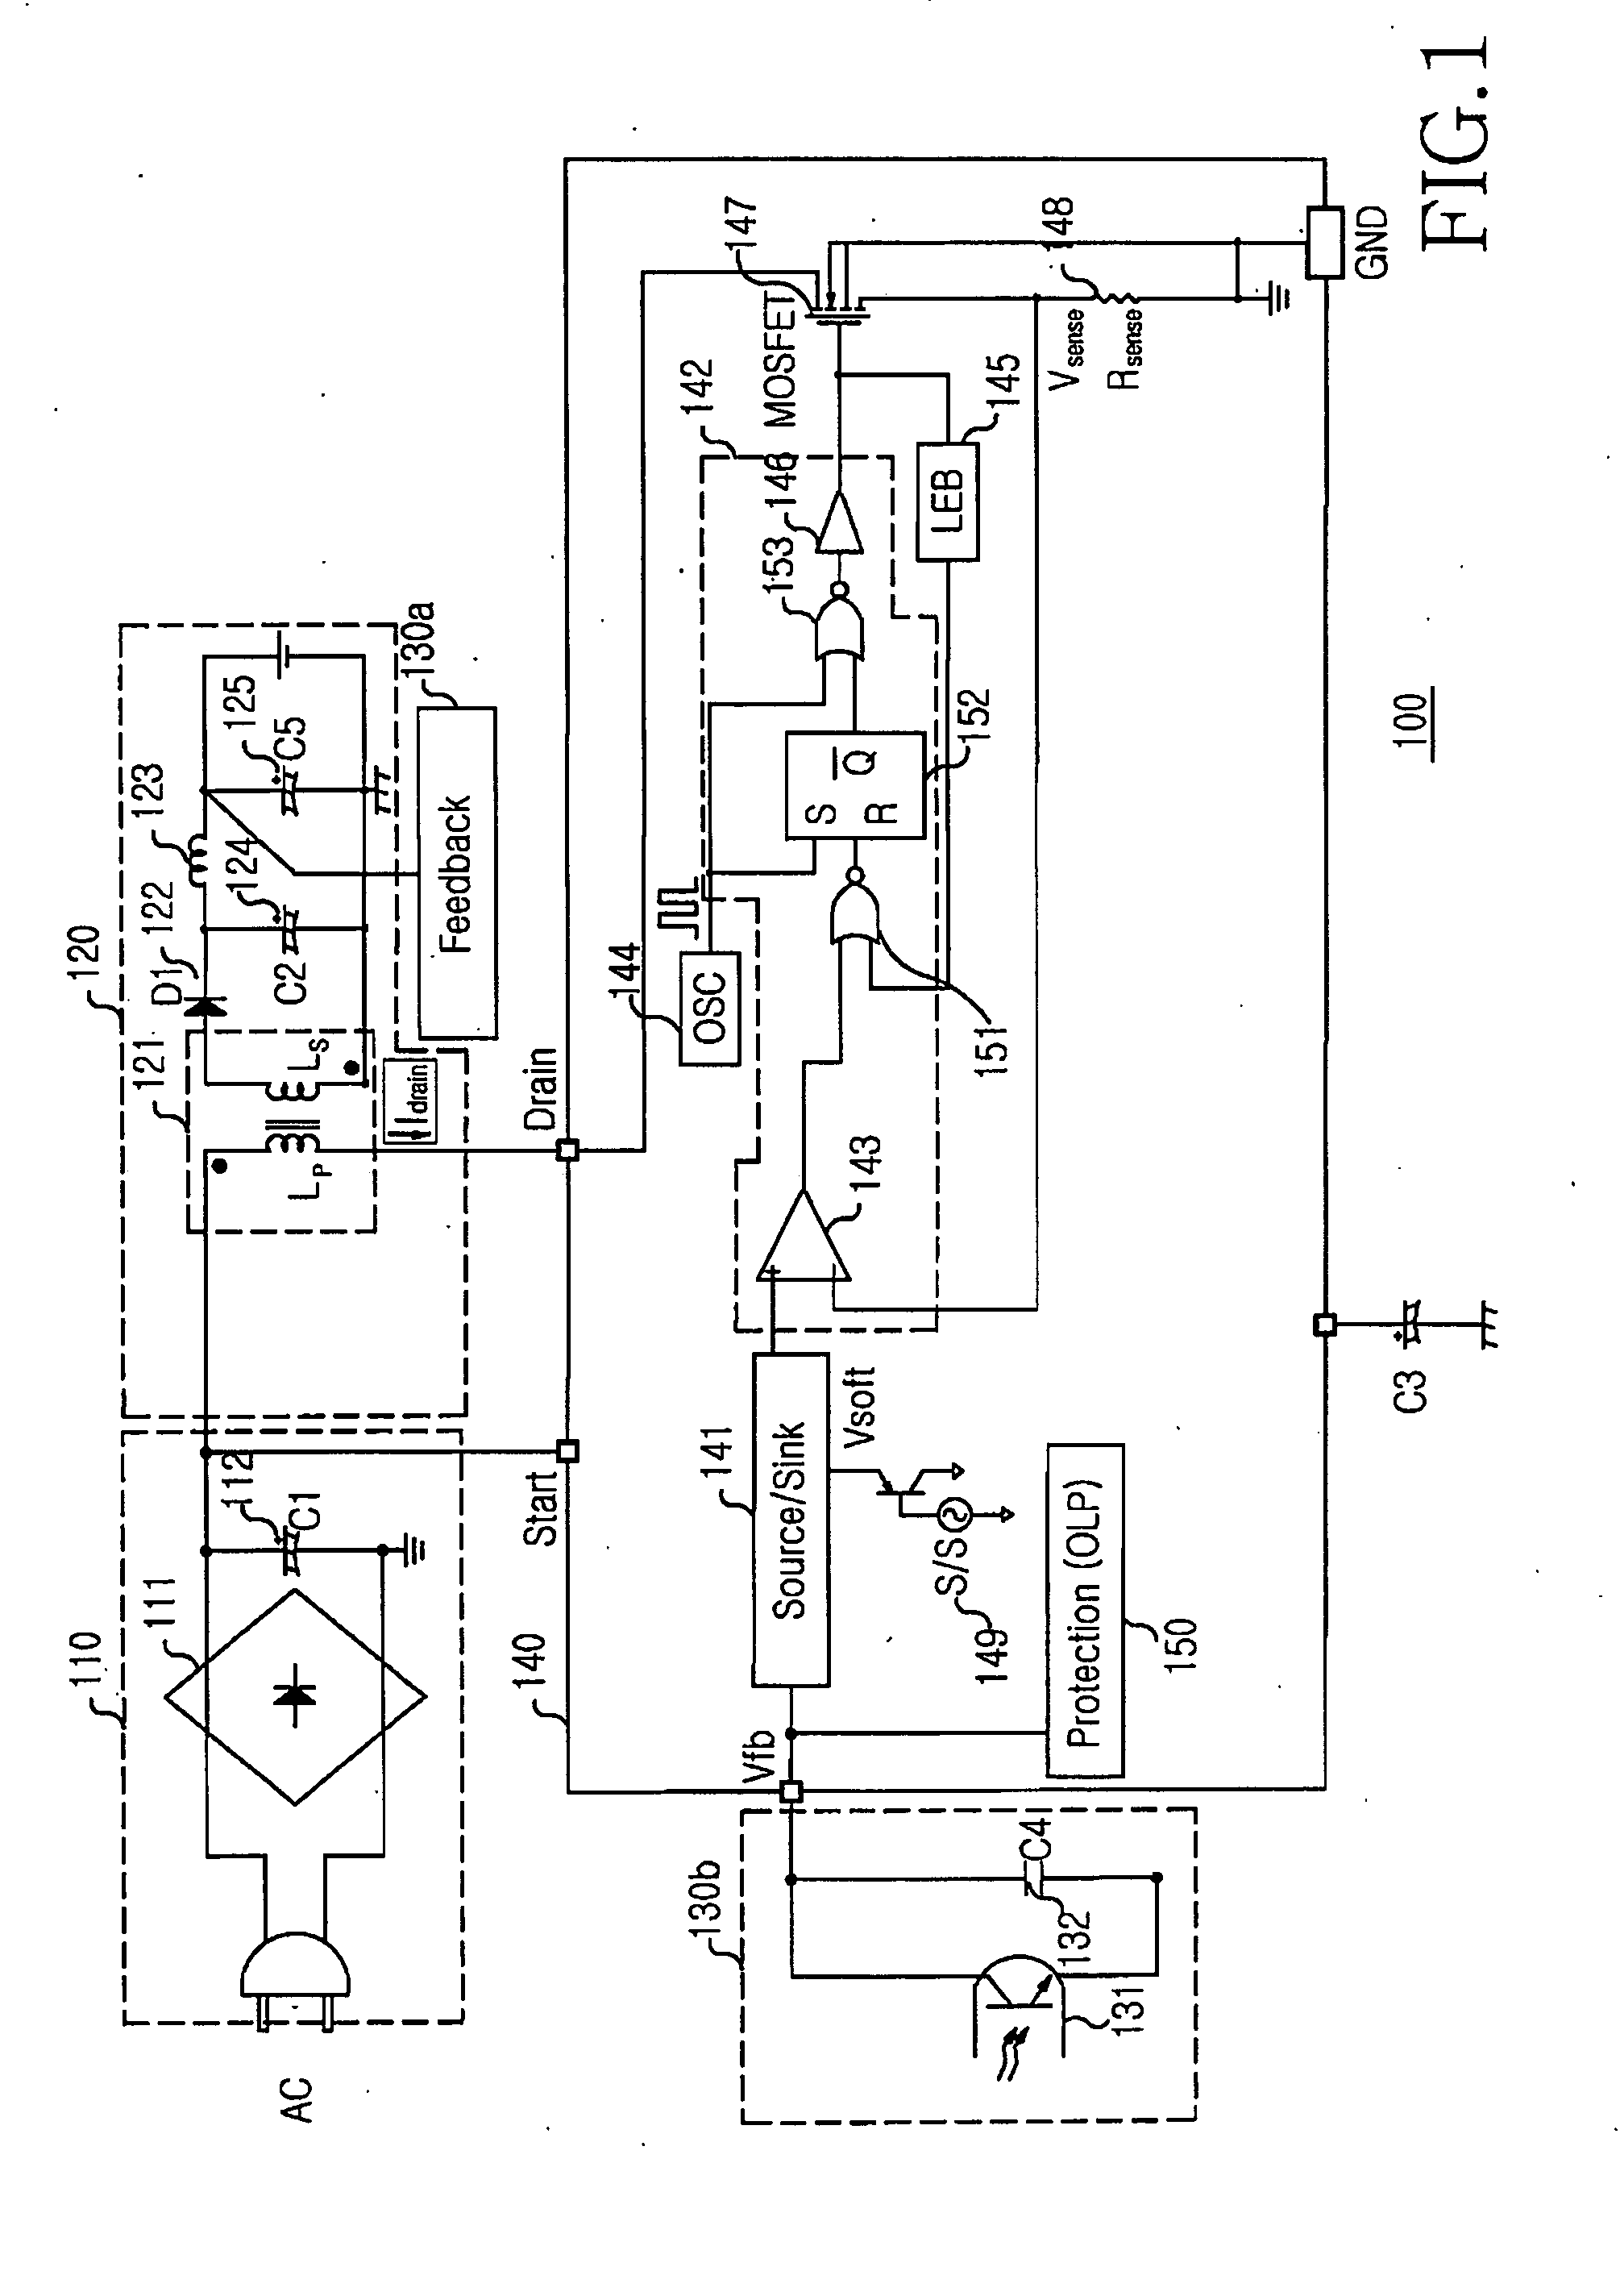 Current controlled switching mode power supply